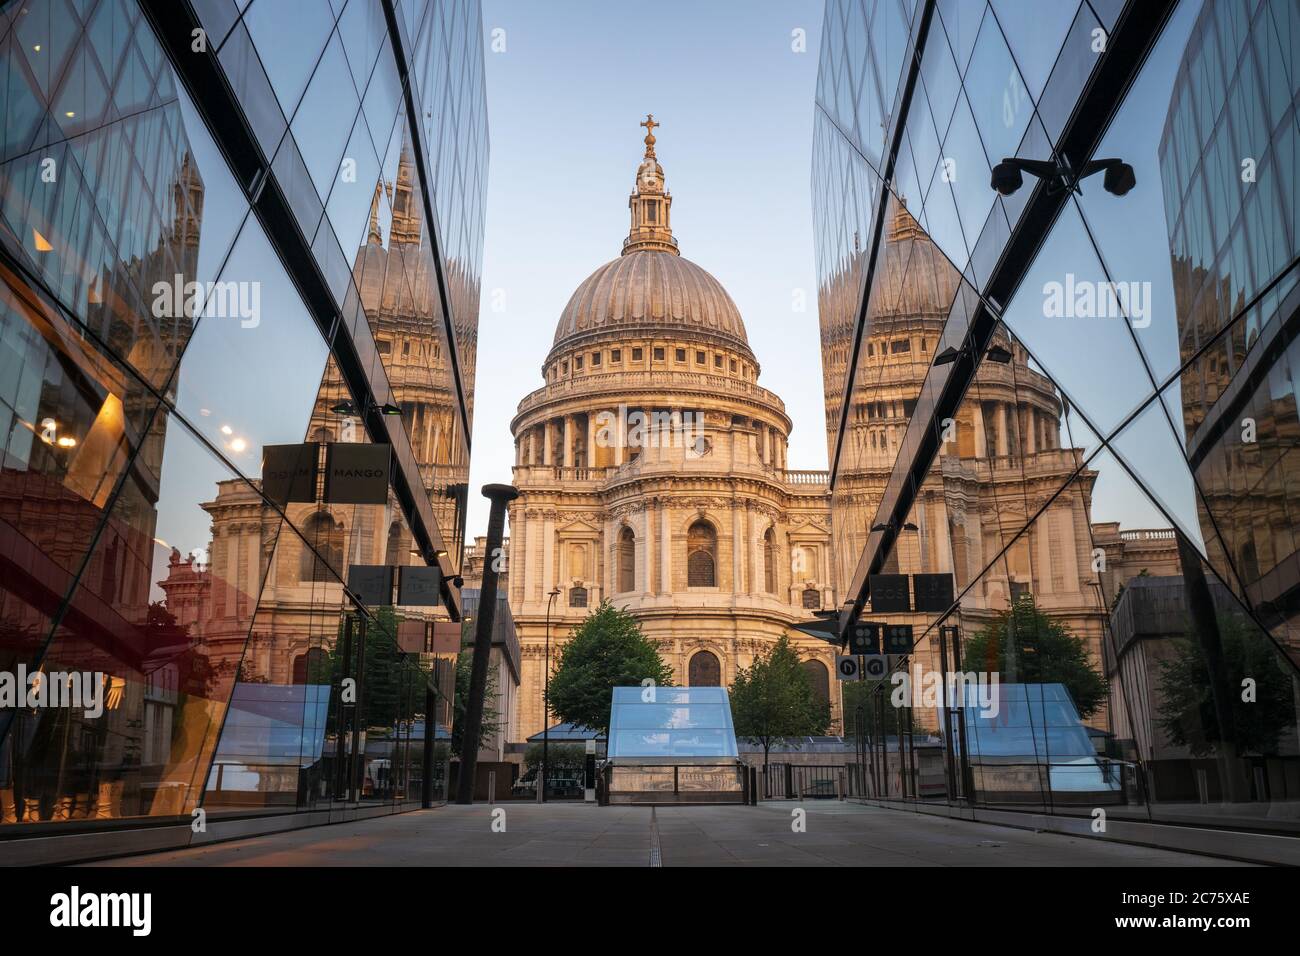 St Pauls Cathedral is reflected in the windows of One New Change on a clear morning, a juxtaposition of traditional and modern in Central London. Stock Photo